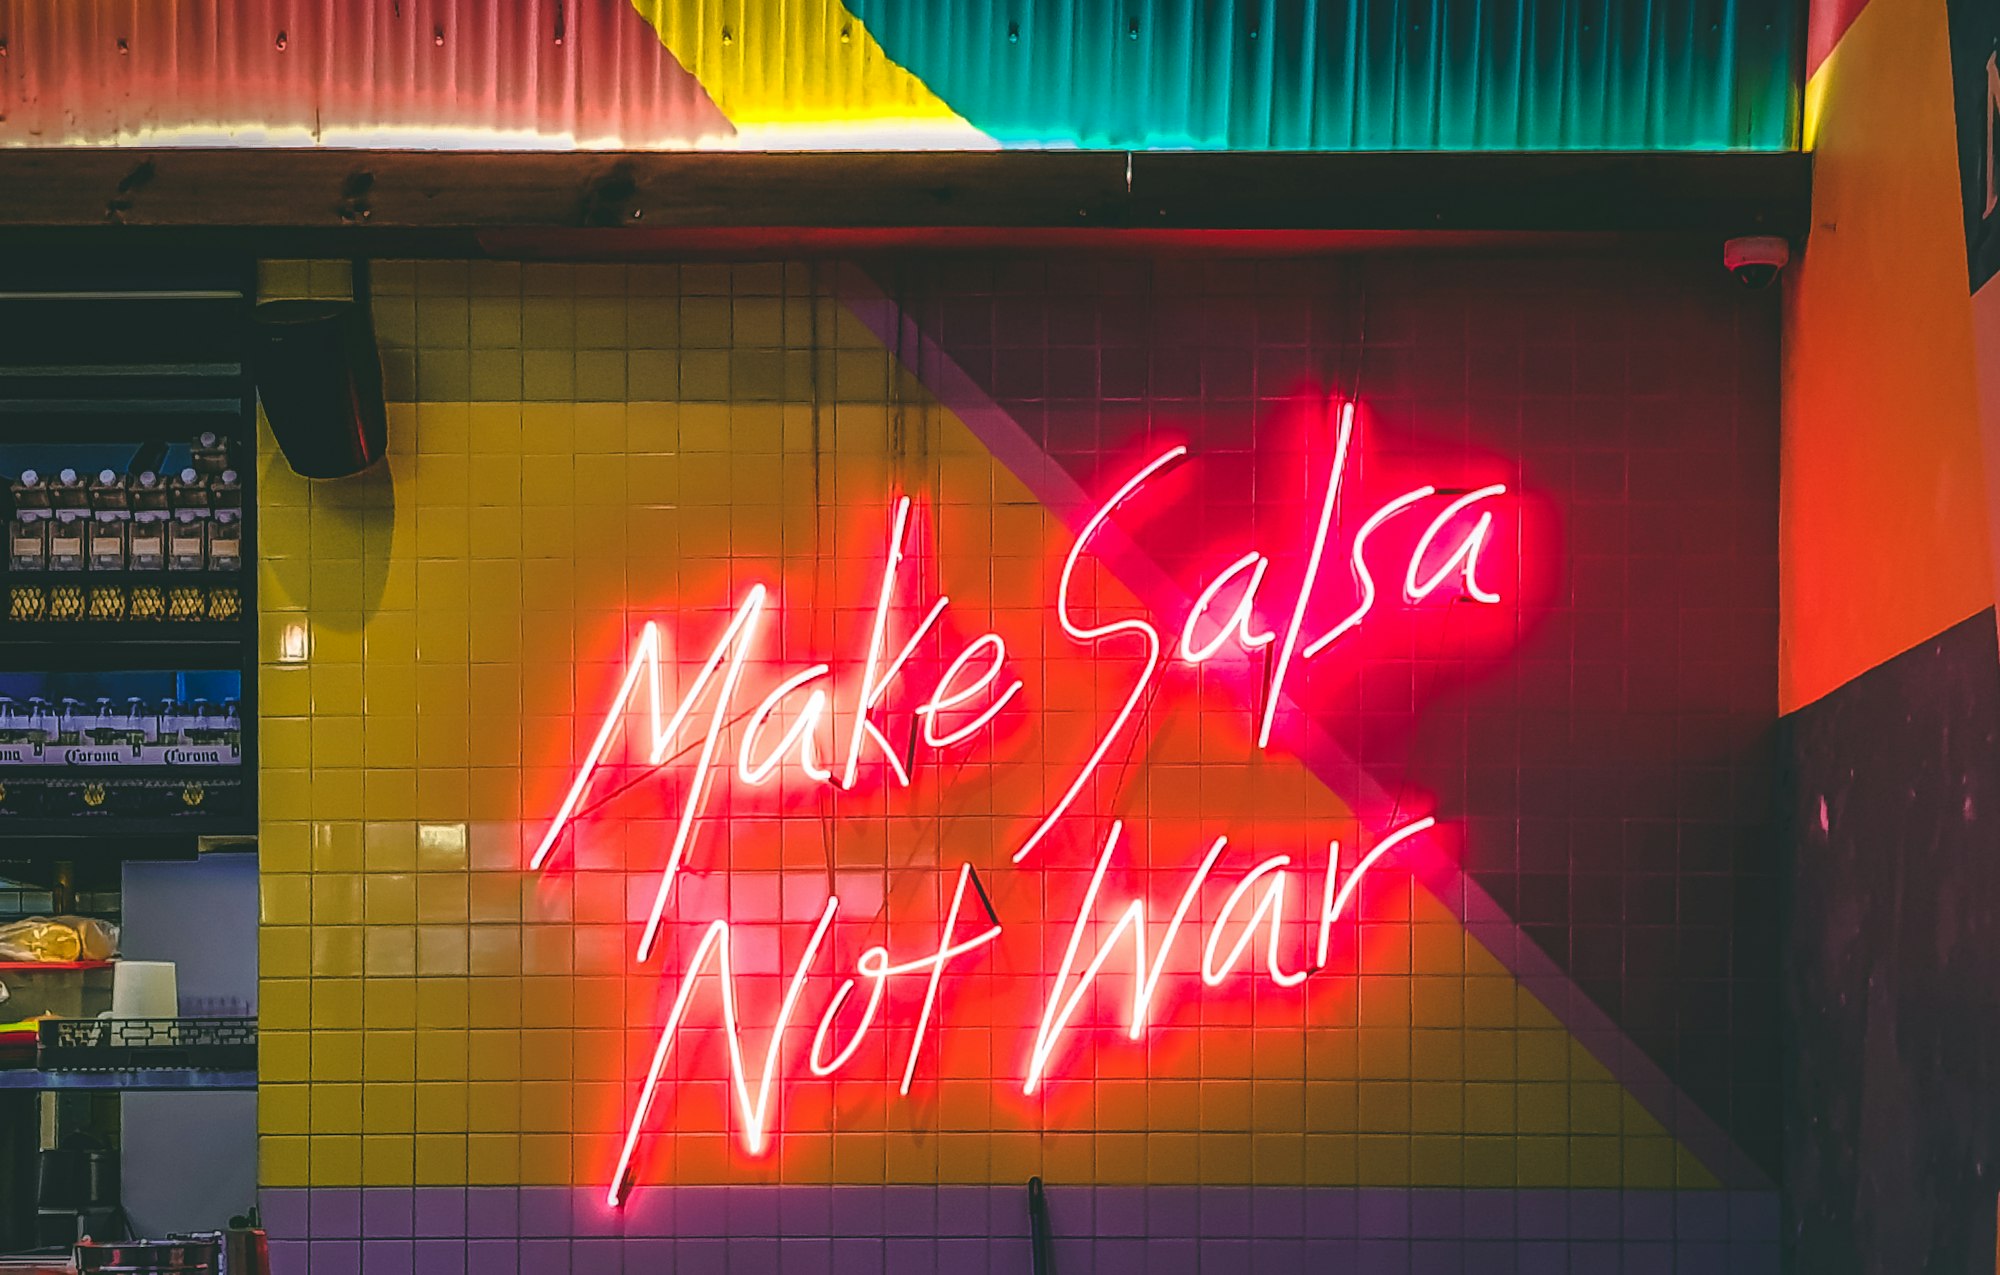 The words 'Make salsa not war' in a large, red neon sigh against a yellow tiled wall